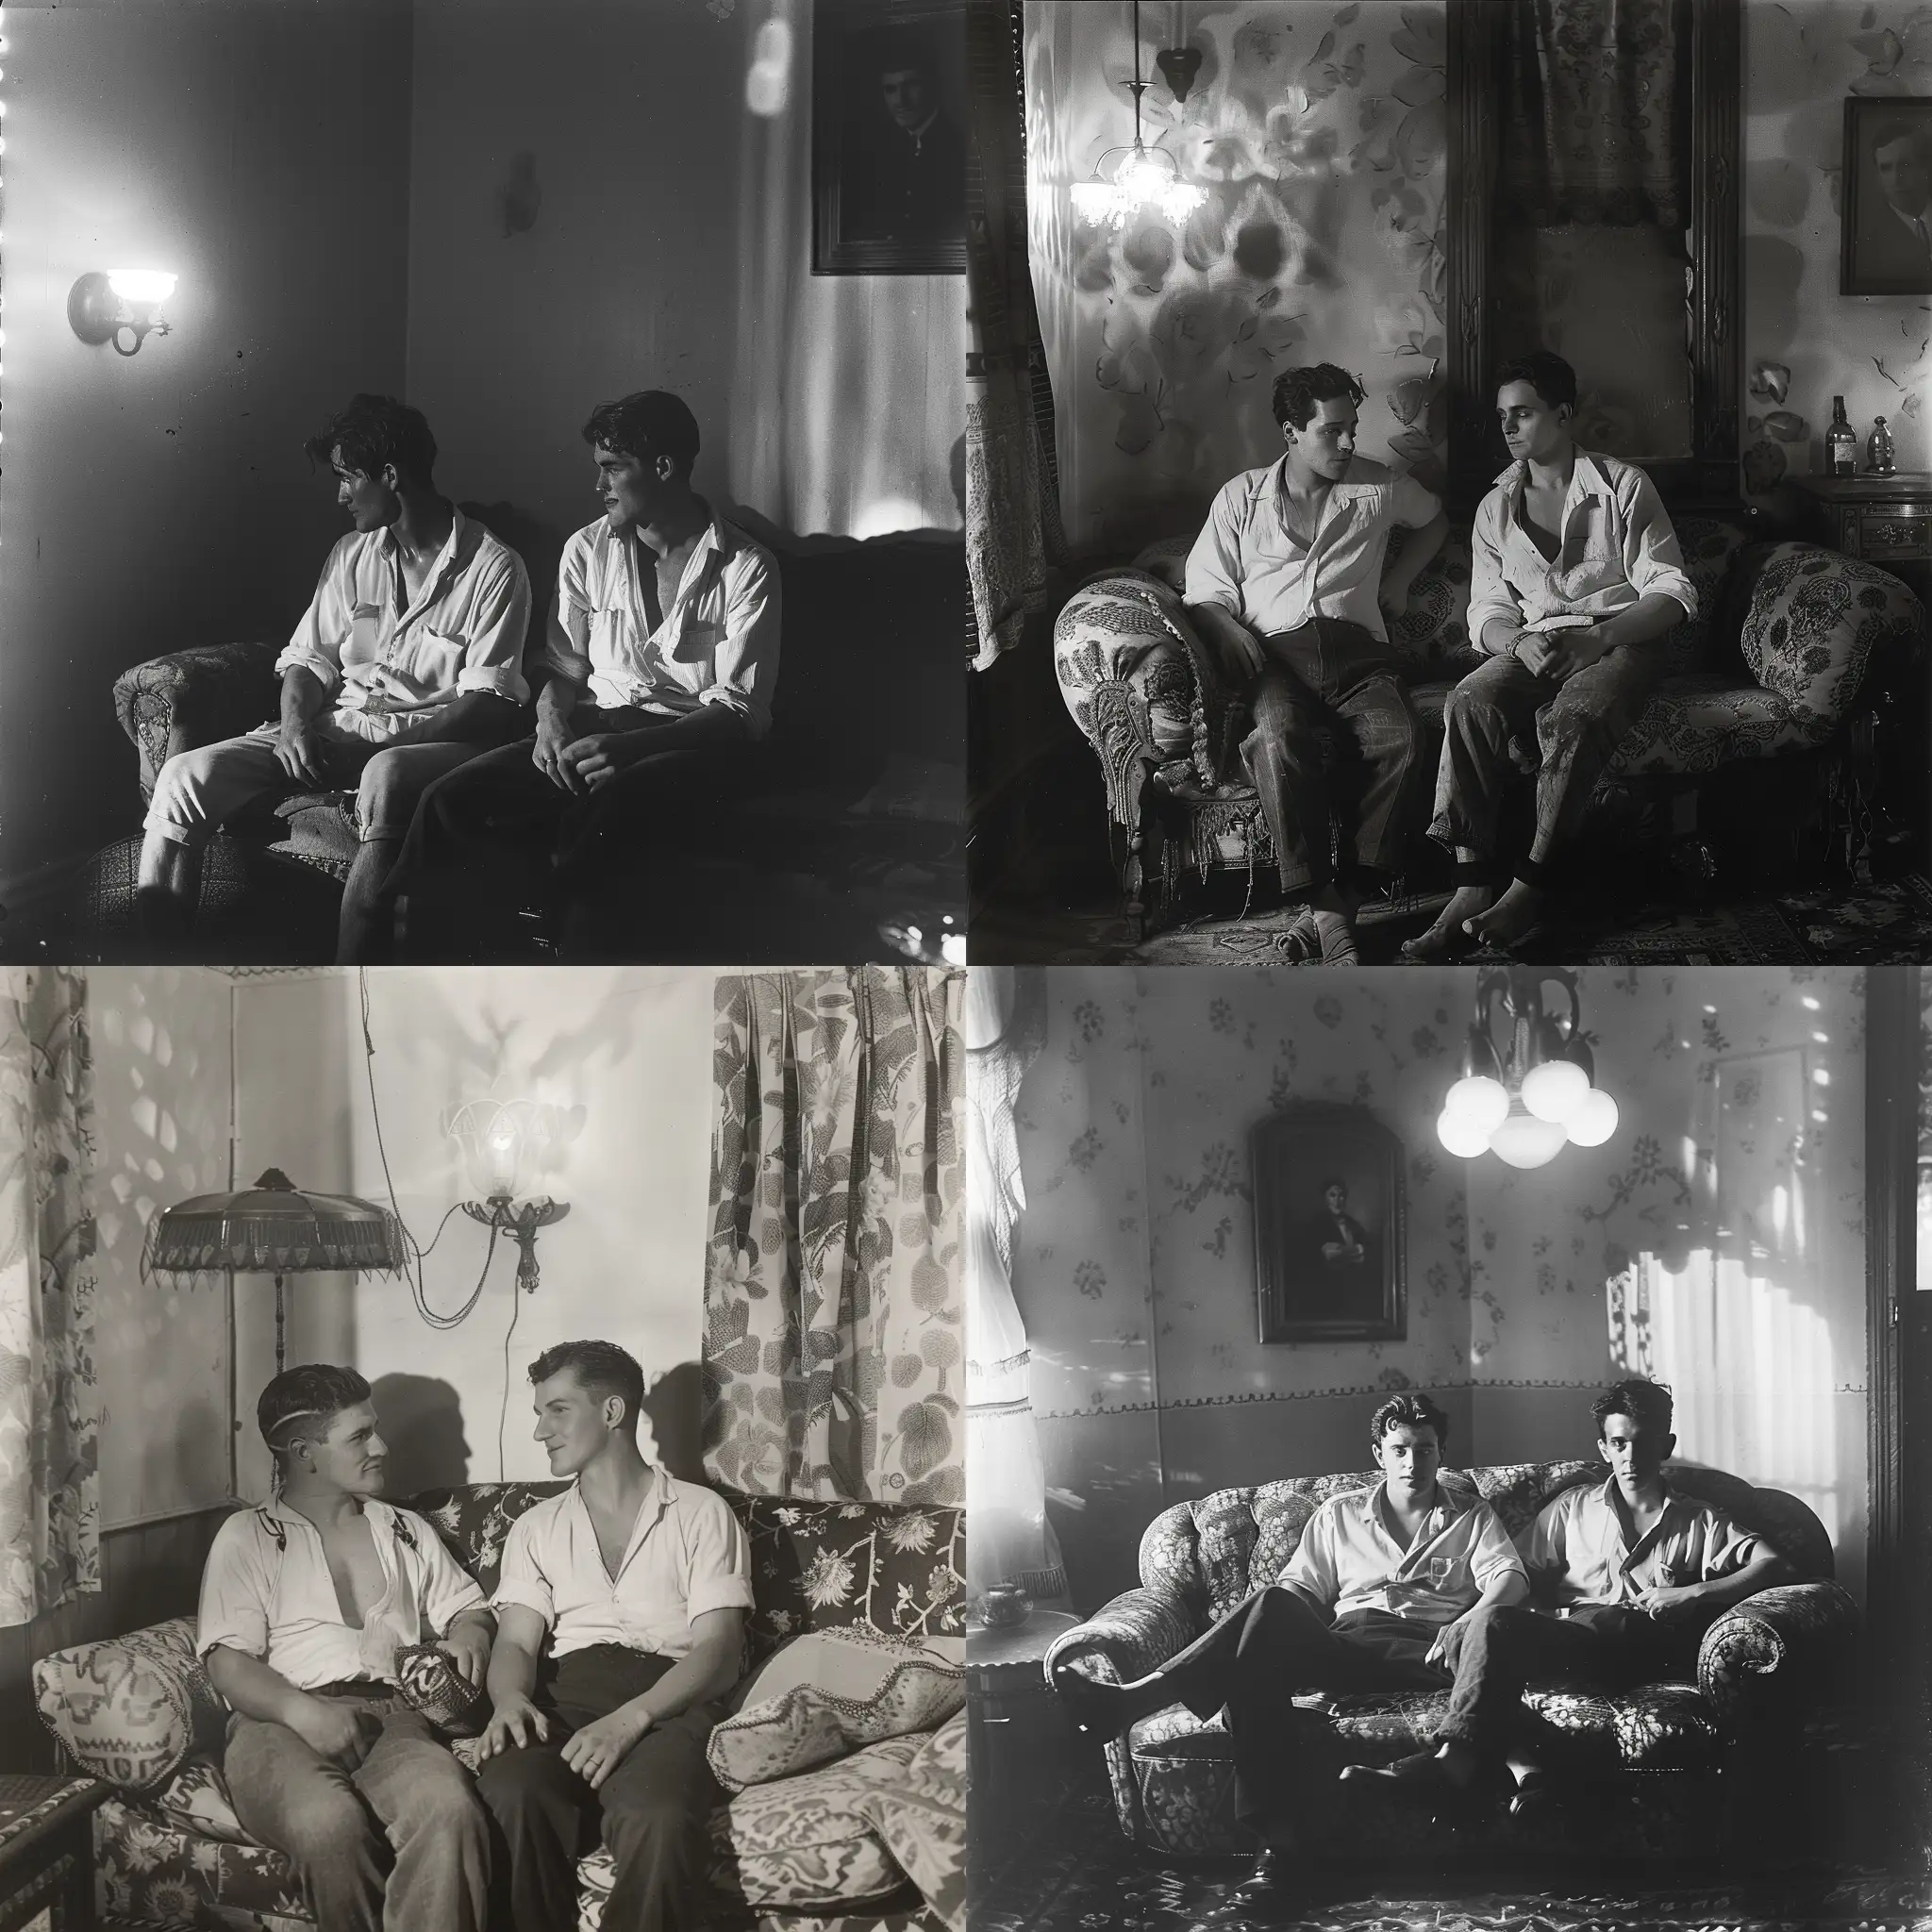 Intimate-Conversation-1920s-Men-in-Unbuttoned-Shirts-on-a-Vintage-Couch